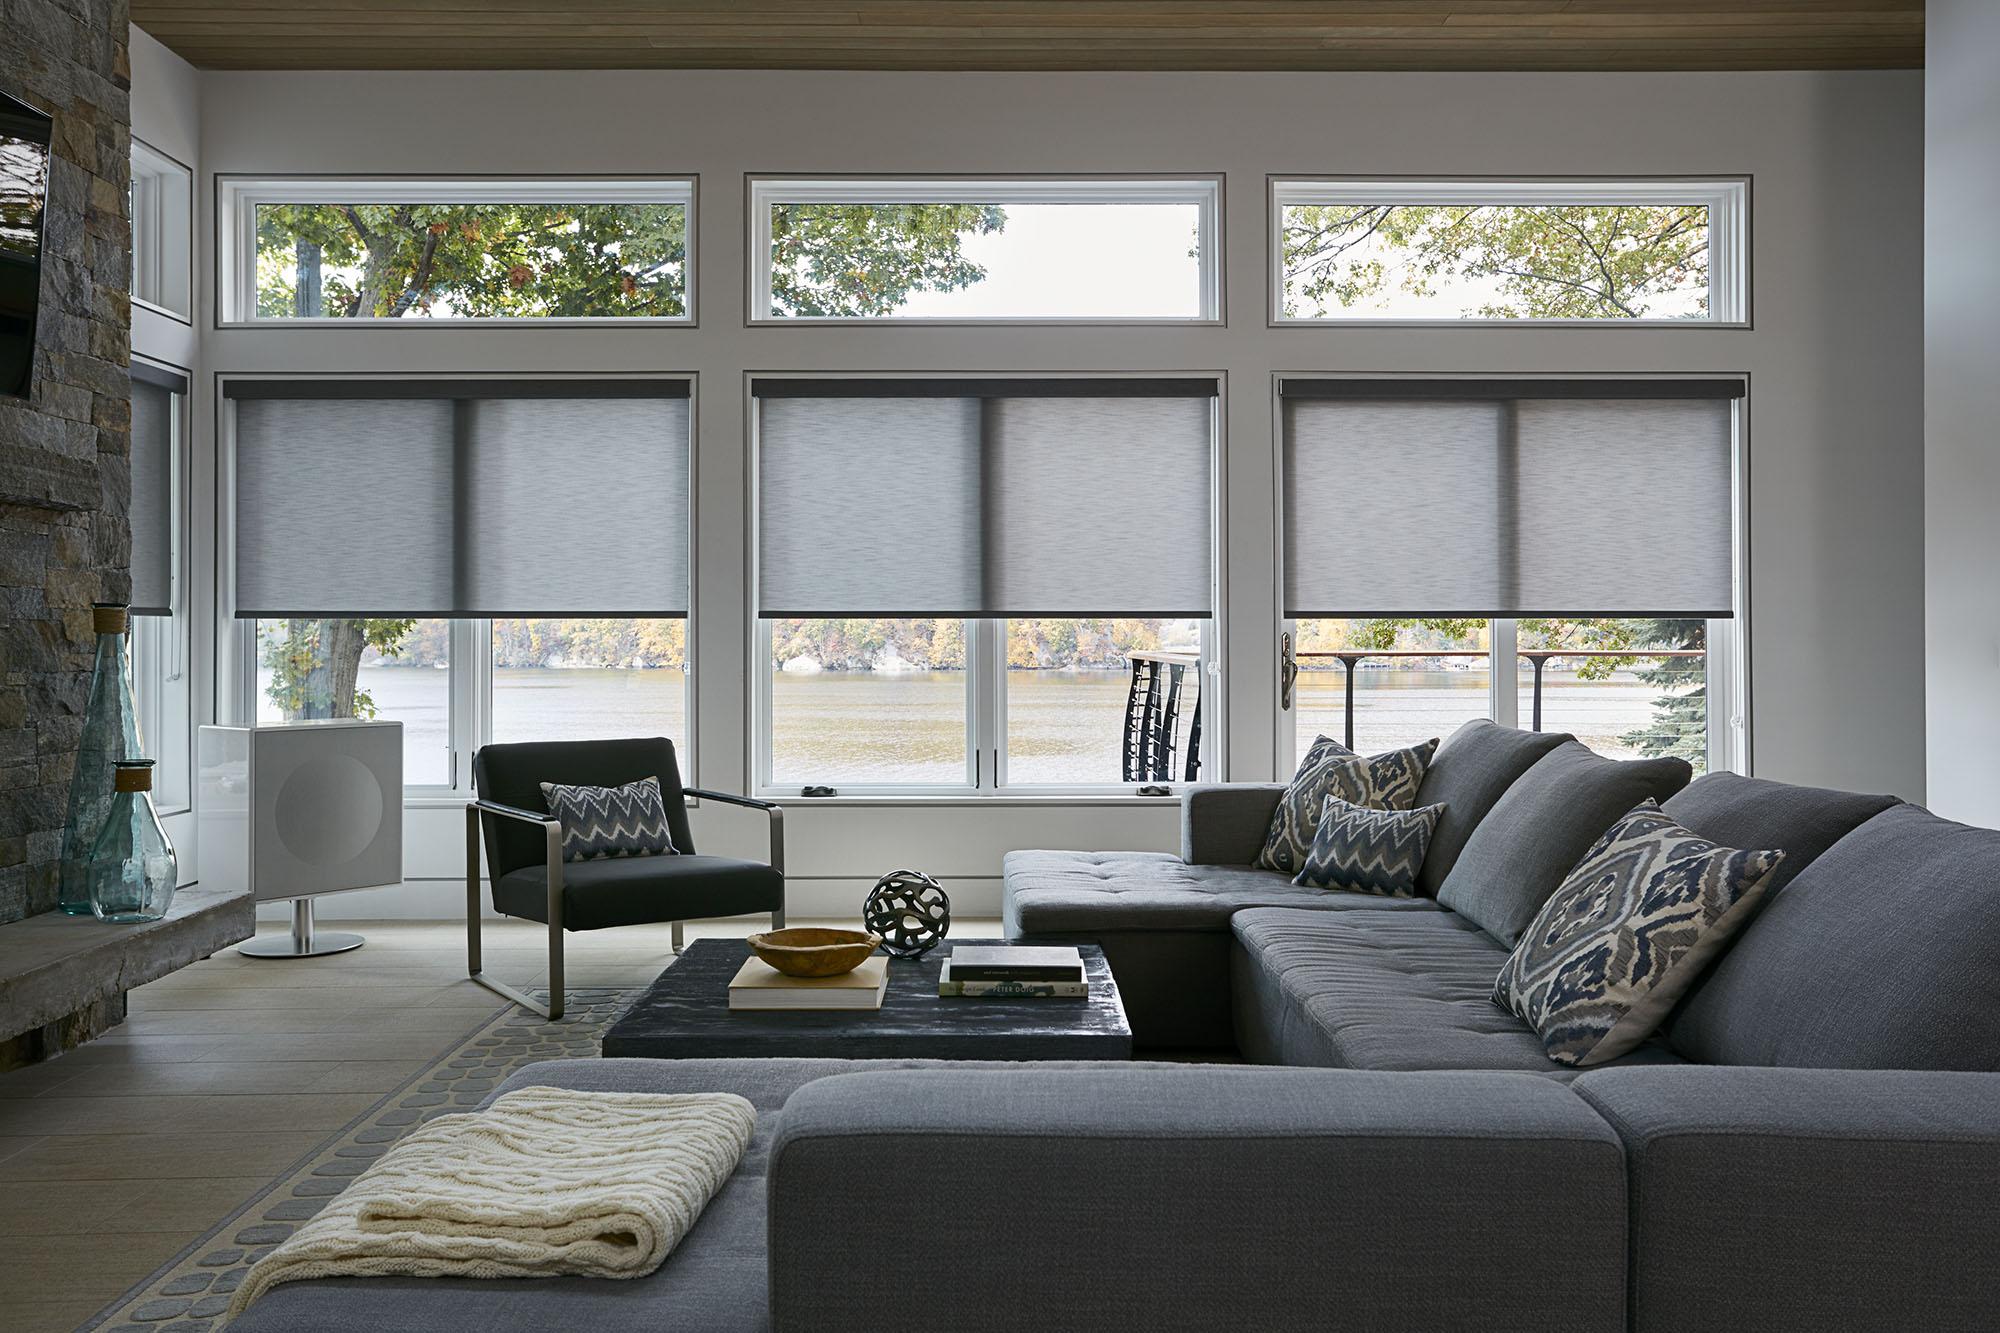 Privacy Shades & Blinds  Window Coverings - Blinds To Go